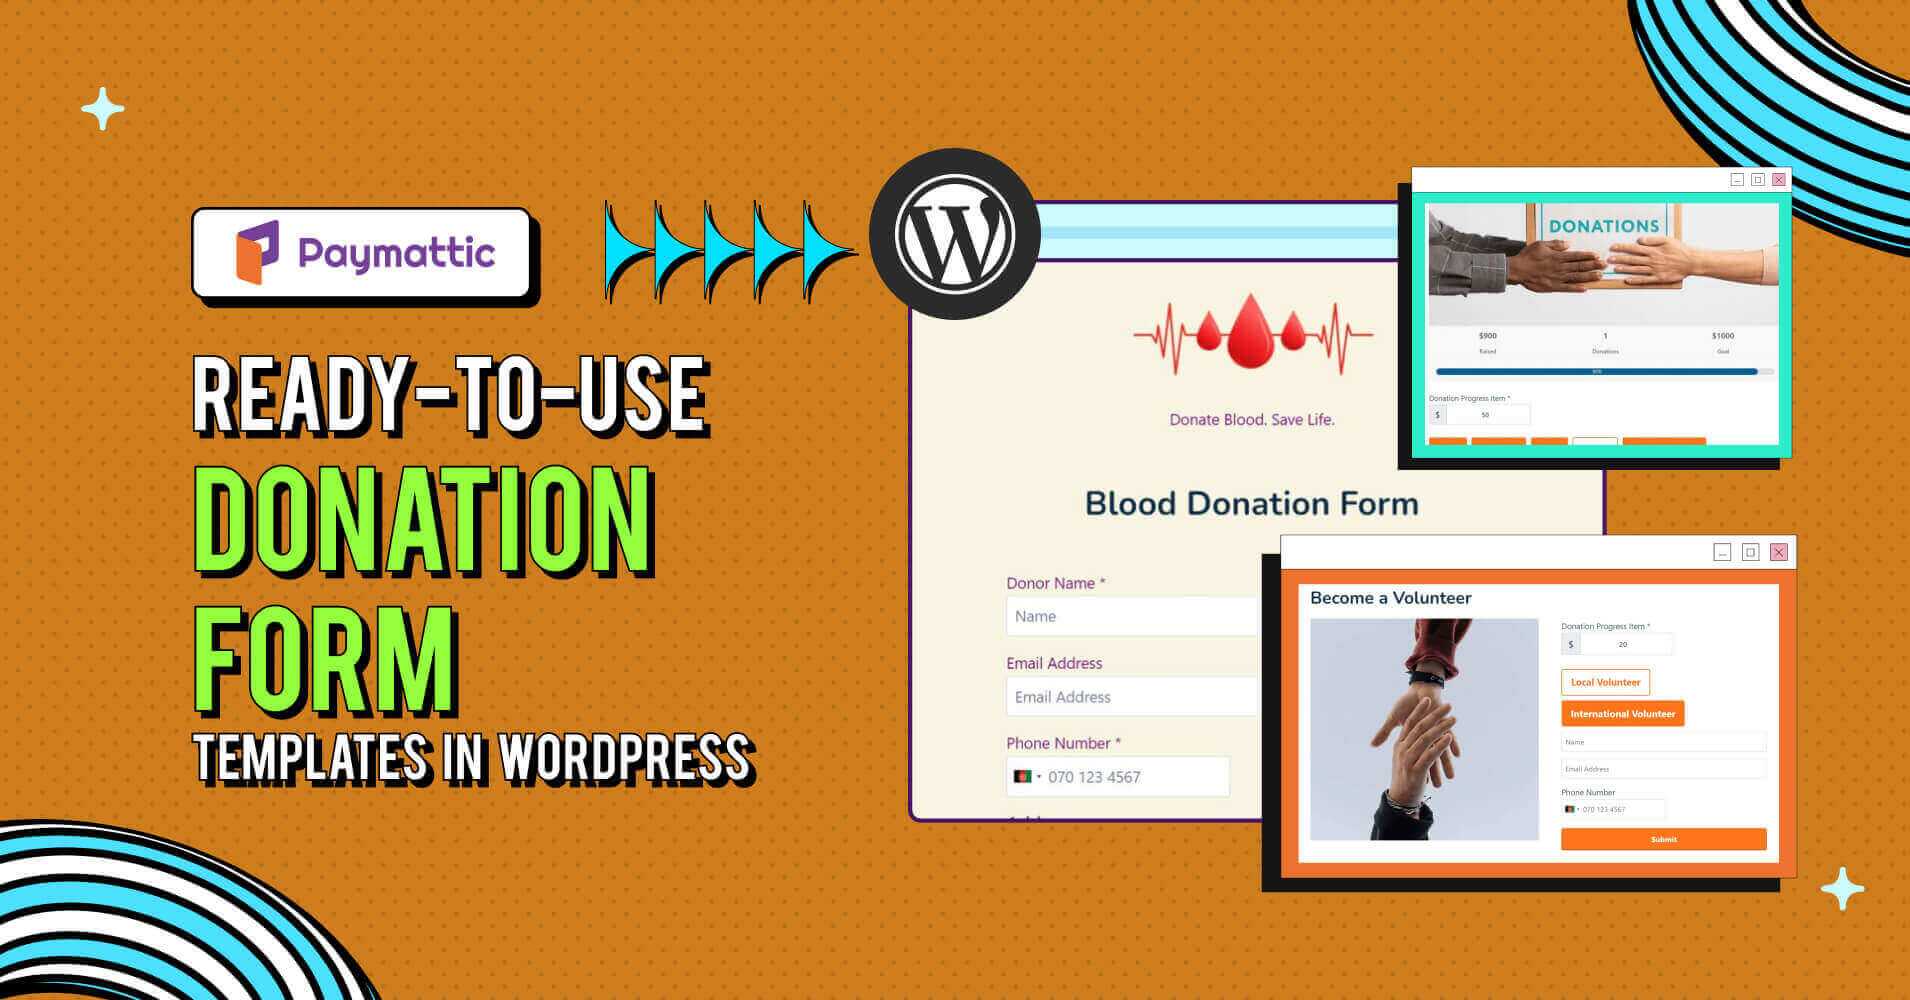 Donation Form Templates in WordPress